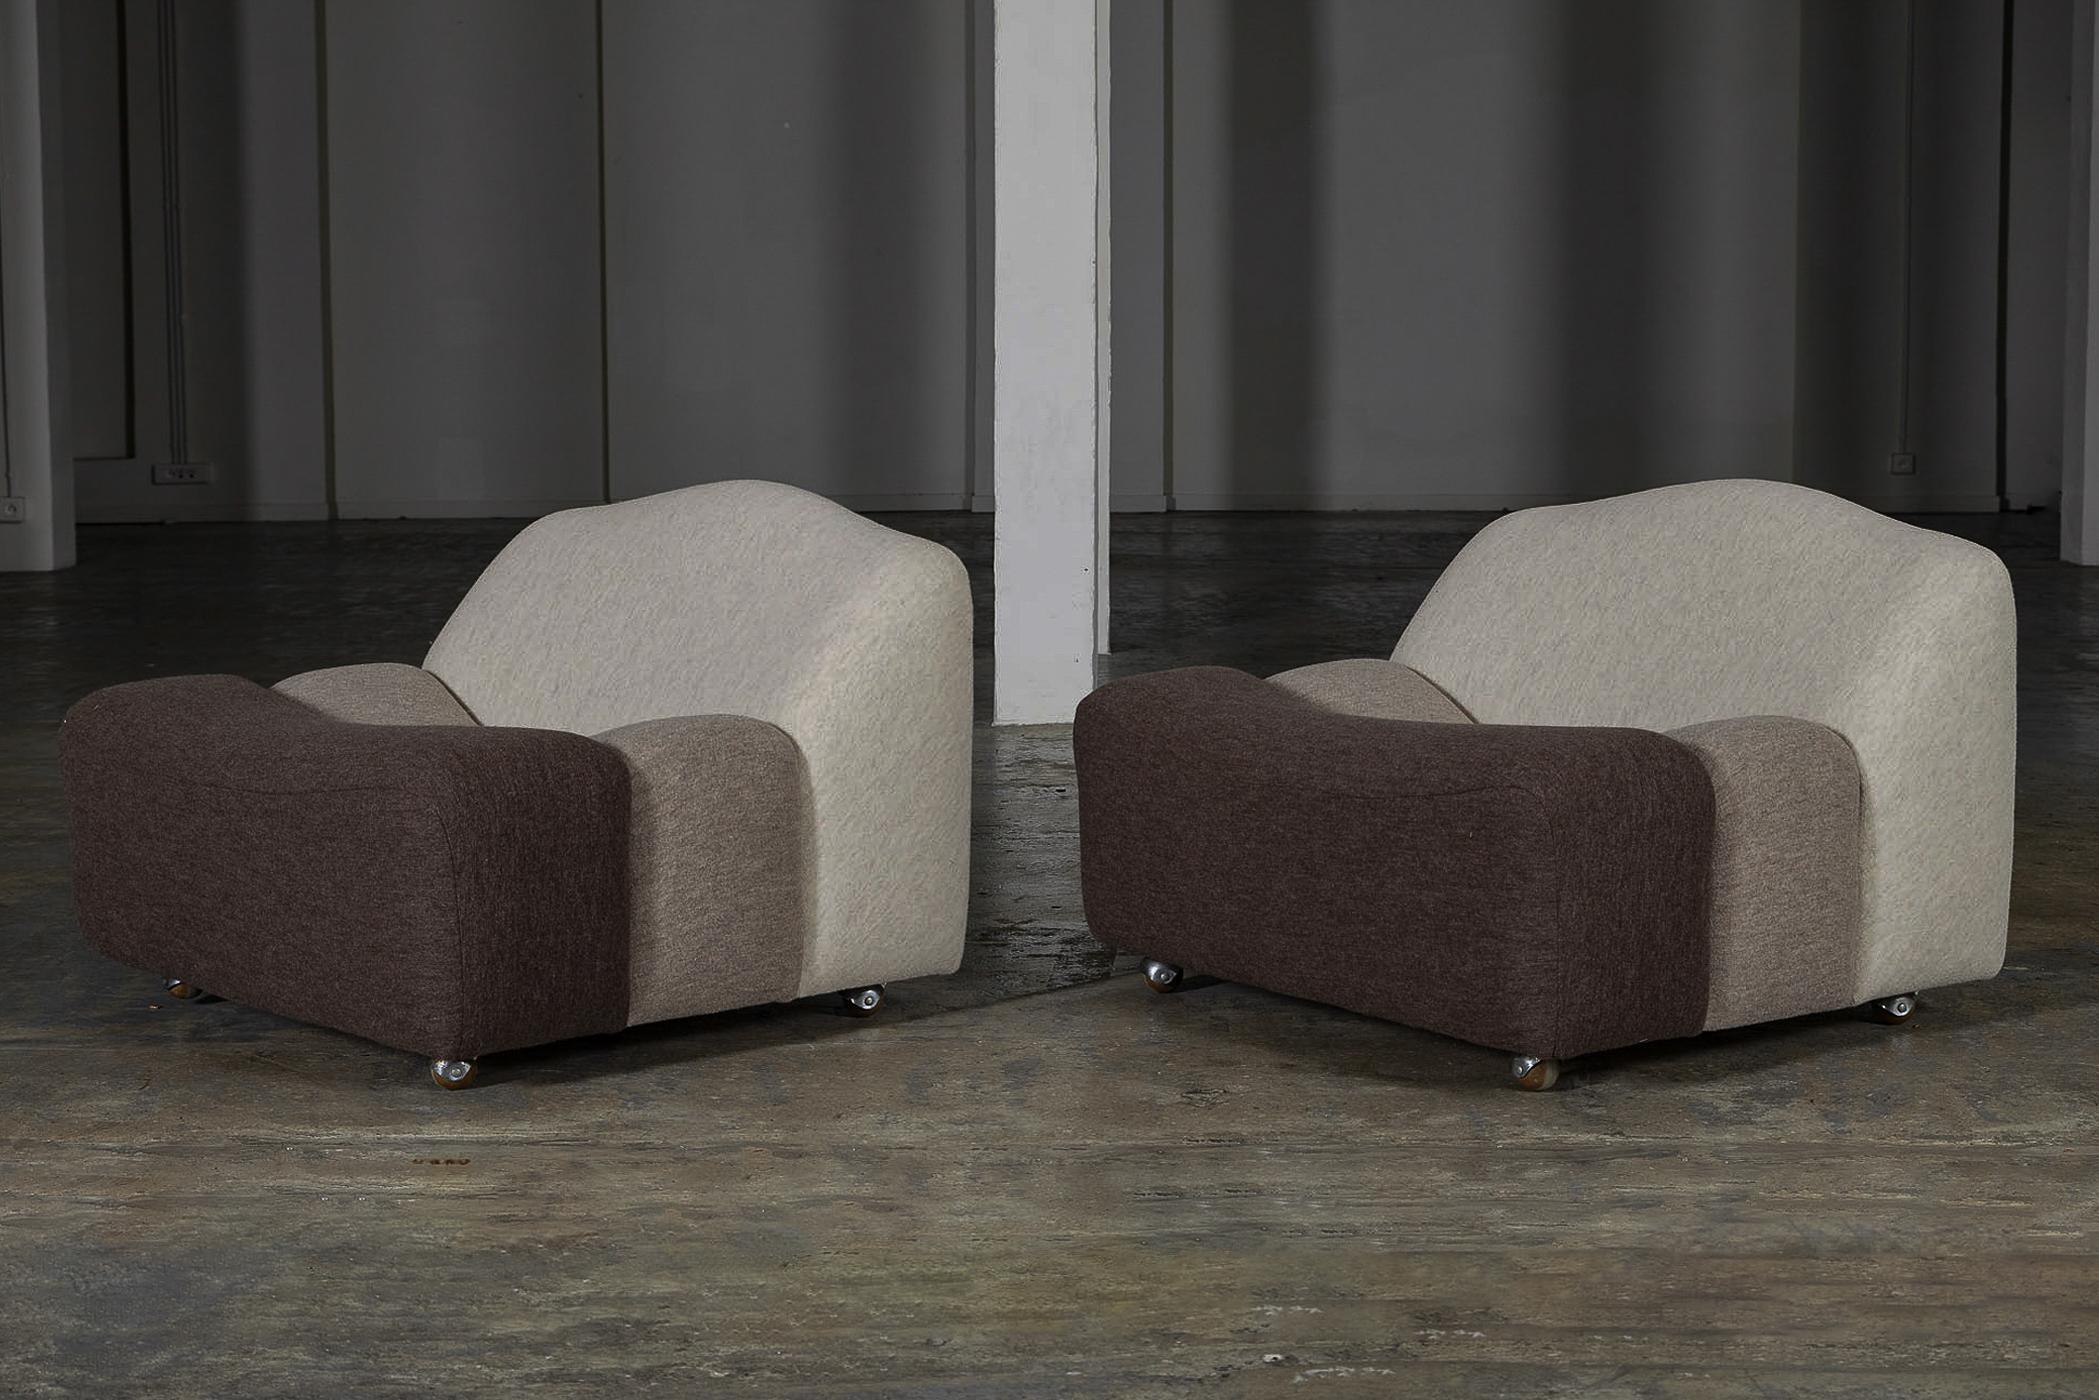 Pair of ABCD armchairs by the famous French designer Pierre Paulin (1927-2009), from the 1970s. The chair's fabric is in shades of beige and sits on casters for easy mobility. This iconic chair features a modular and undulating structure, allowing